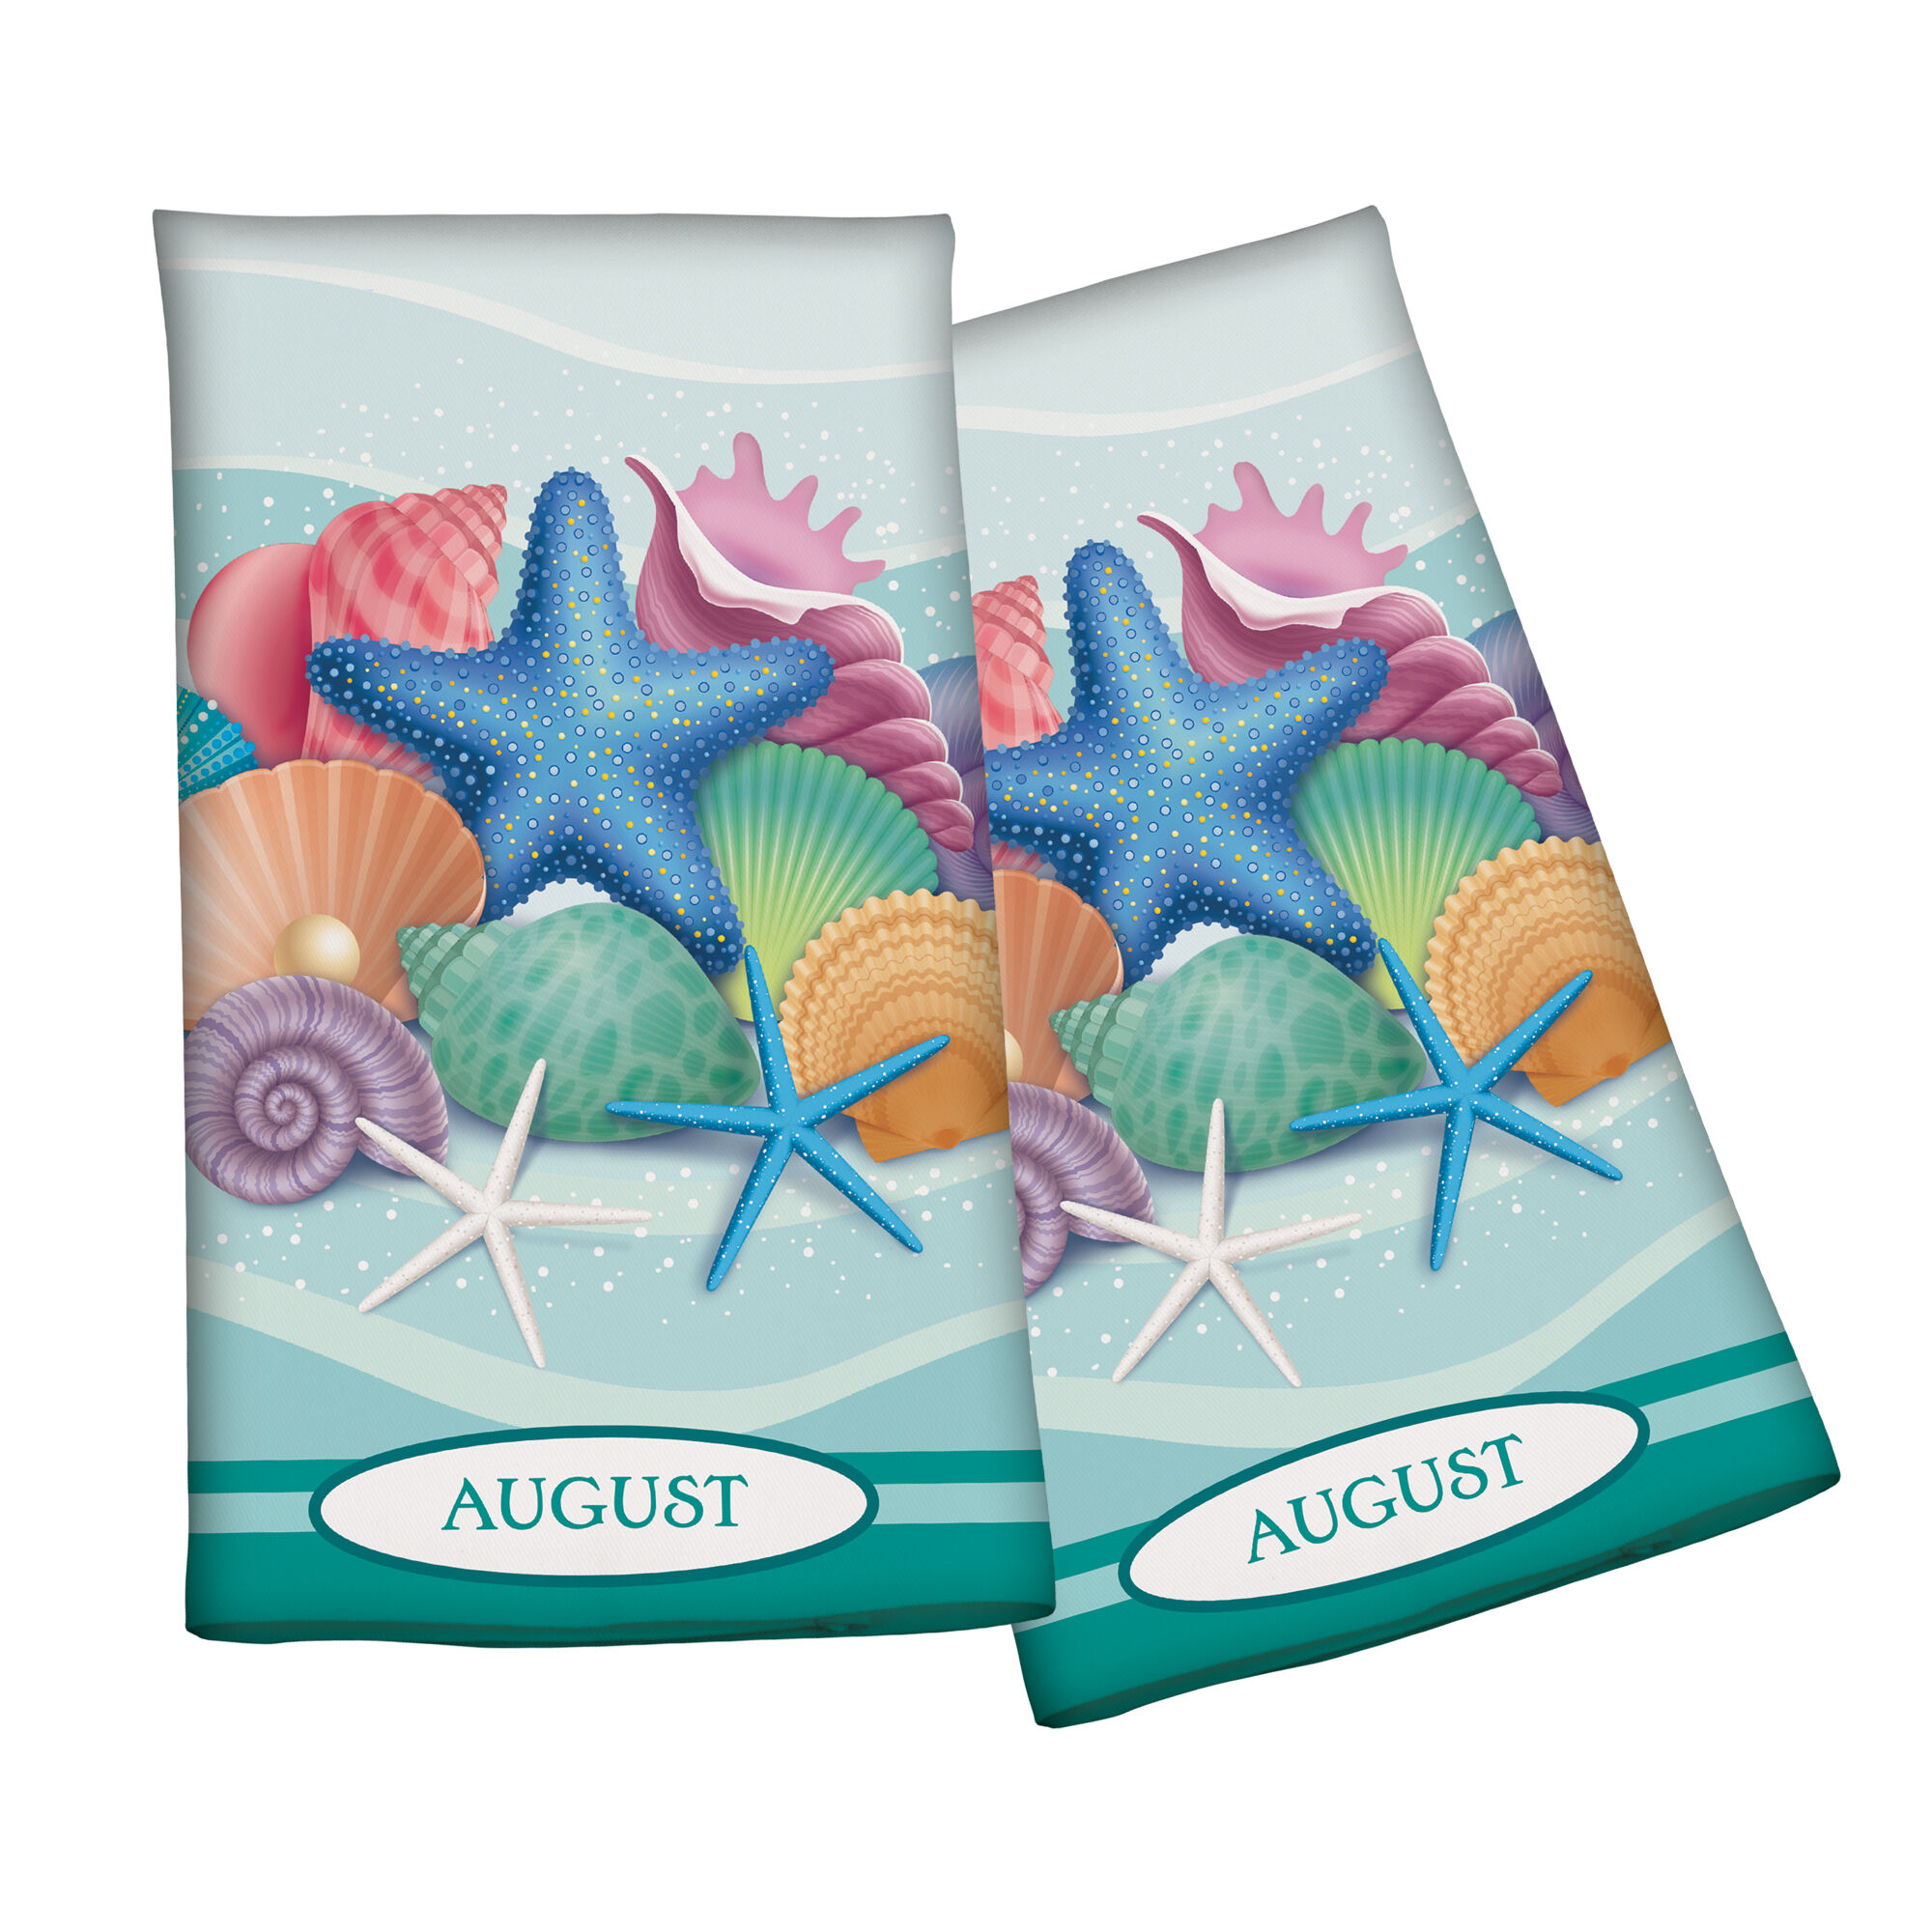 Year of Cheer Kitchen Towel Collection 6844 0015 d august